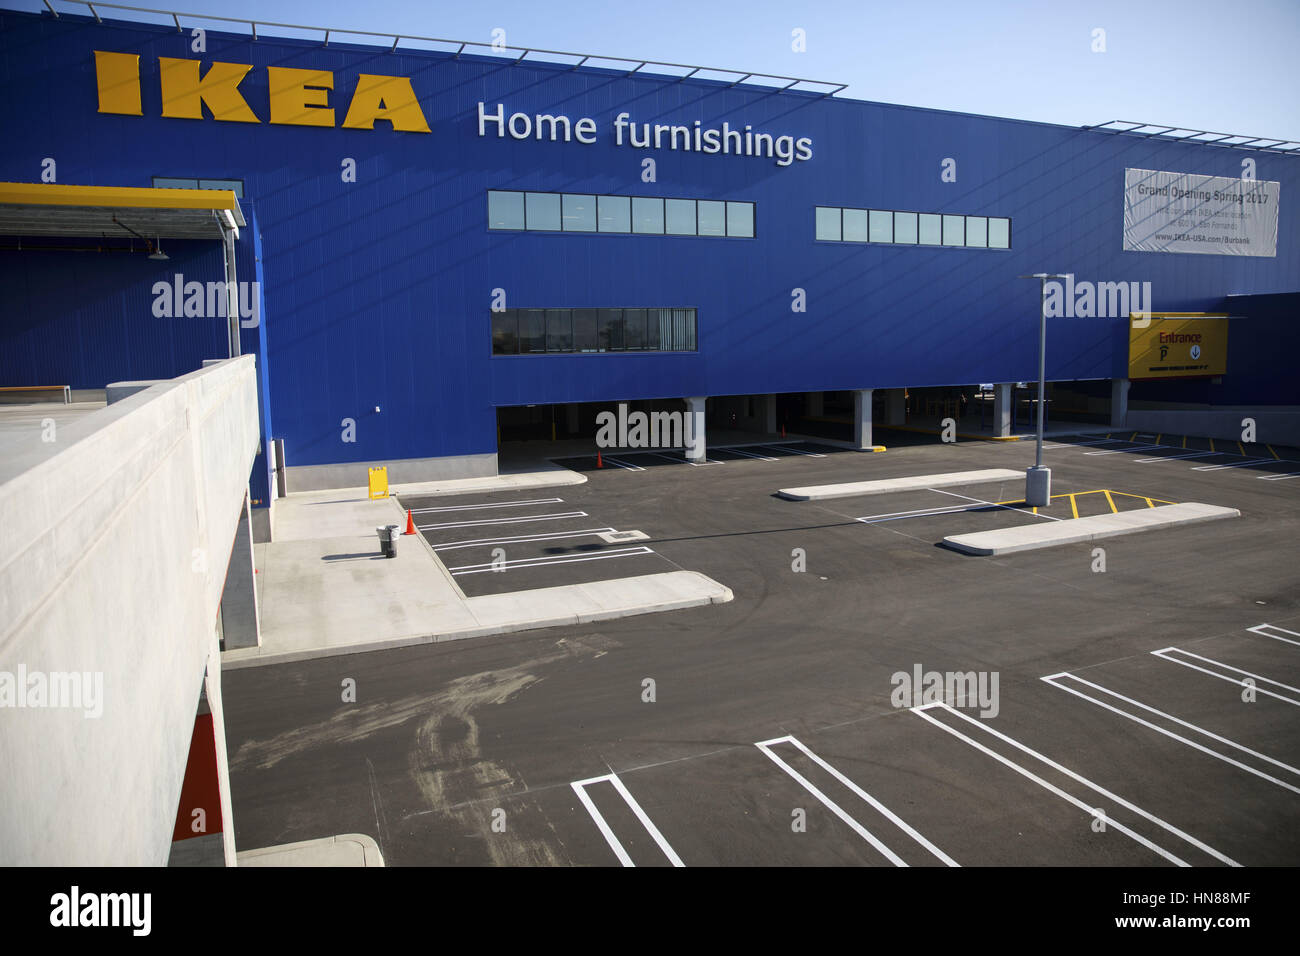 Burbank, CA, USA. 1st Feb, 2017. The parking lot of the new IKEA Burbank  Home Furnishings store on Wednesday, February 1, 2017 in Burbank, Calif.  The 456,000 square foot furniture store on